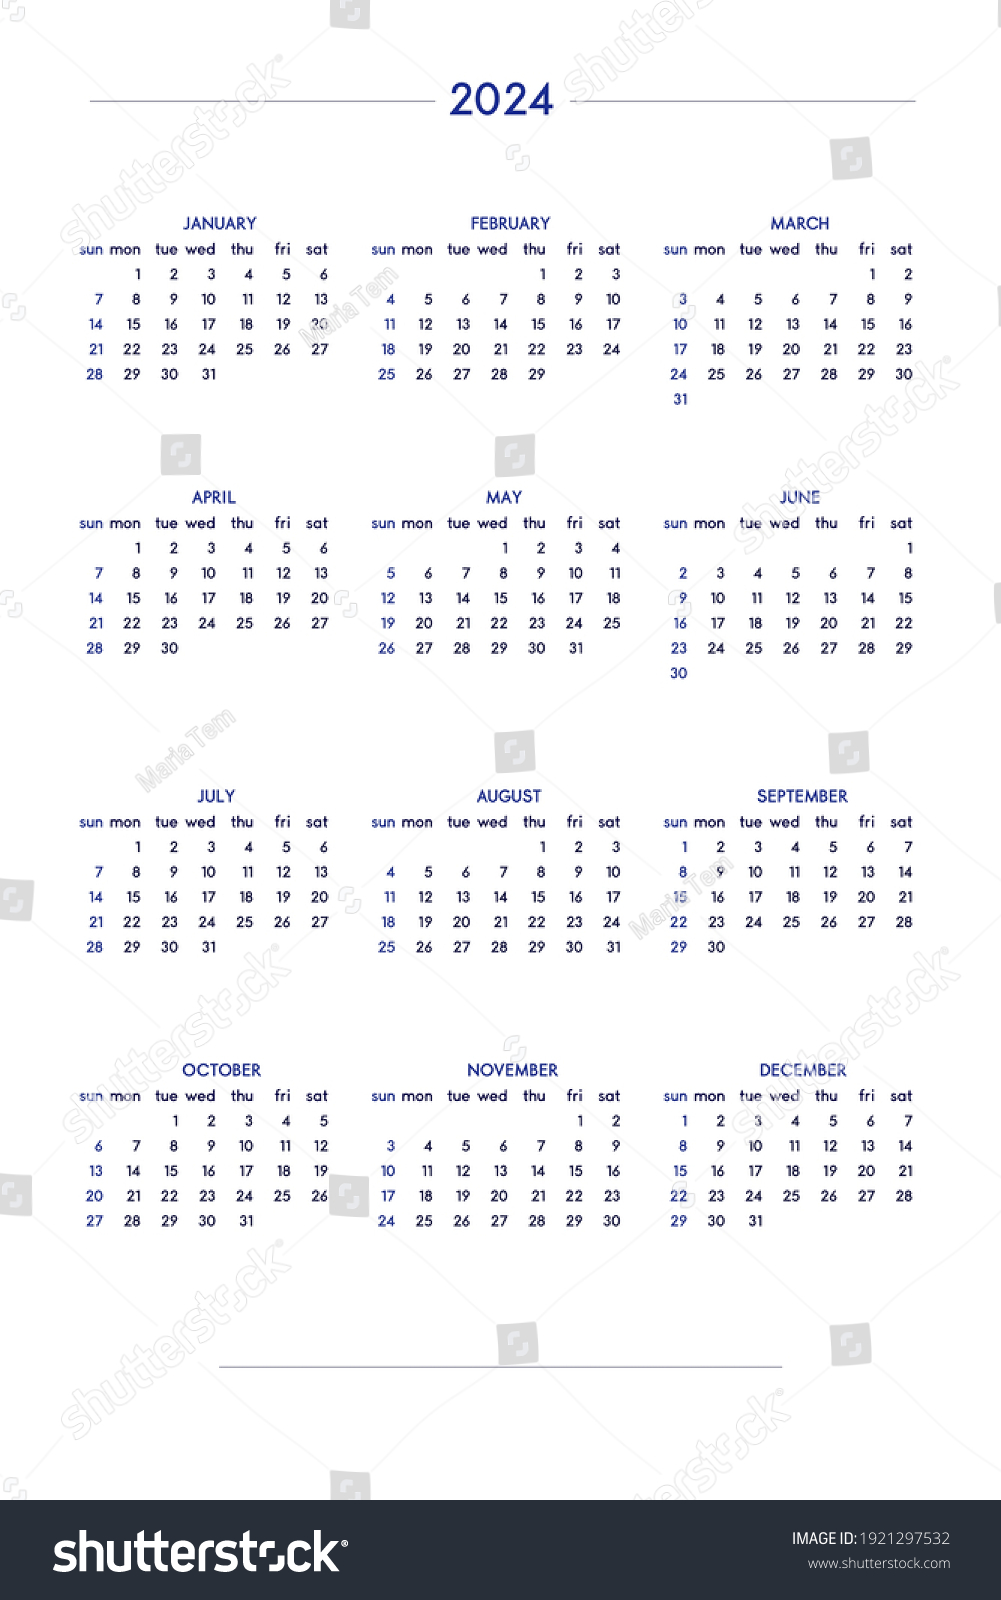 2024-calendar-set-classic-strict-style-stock-vector-royalty-free